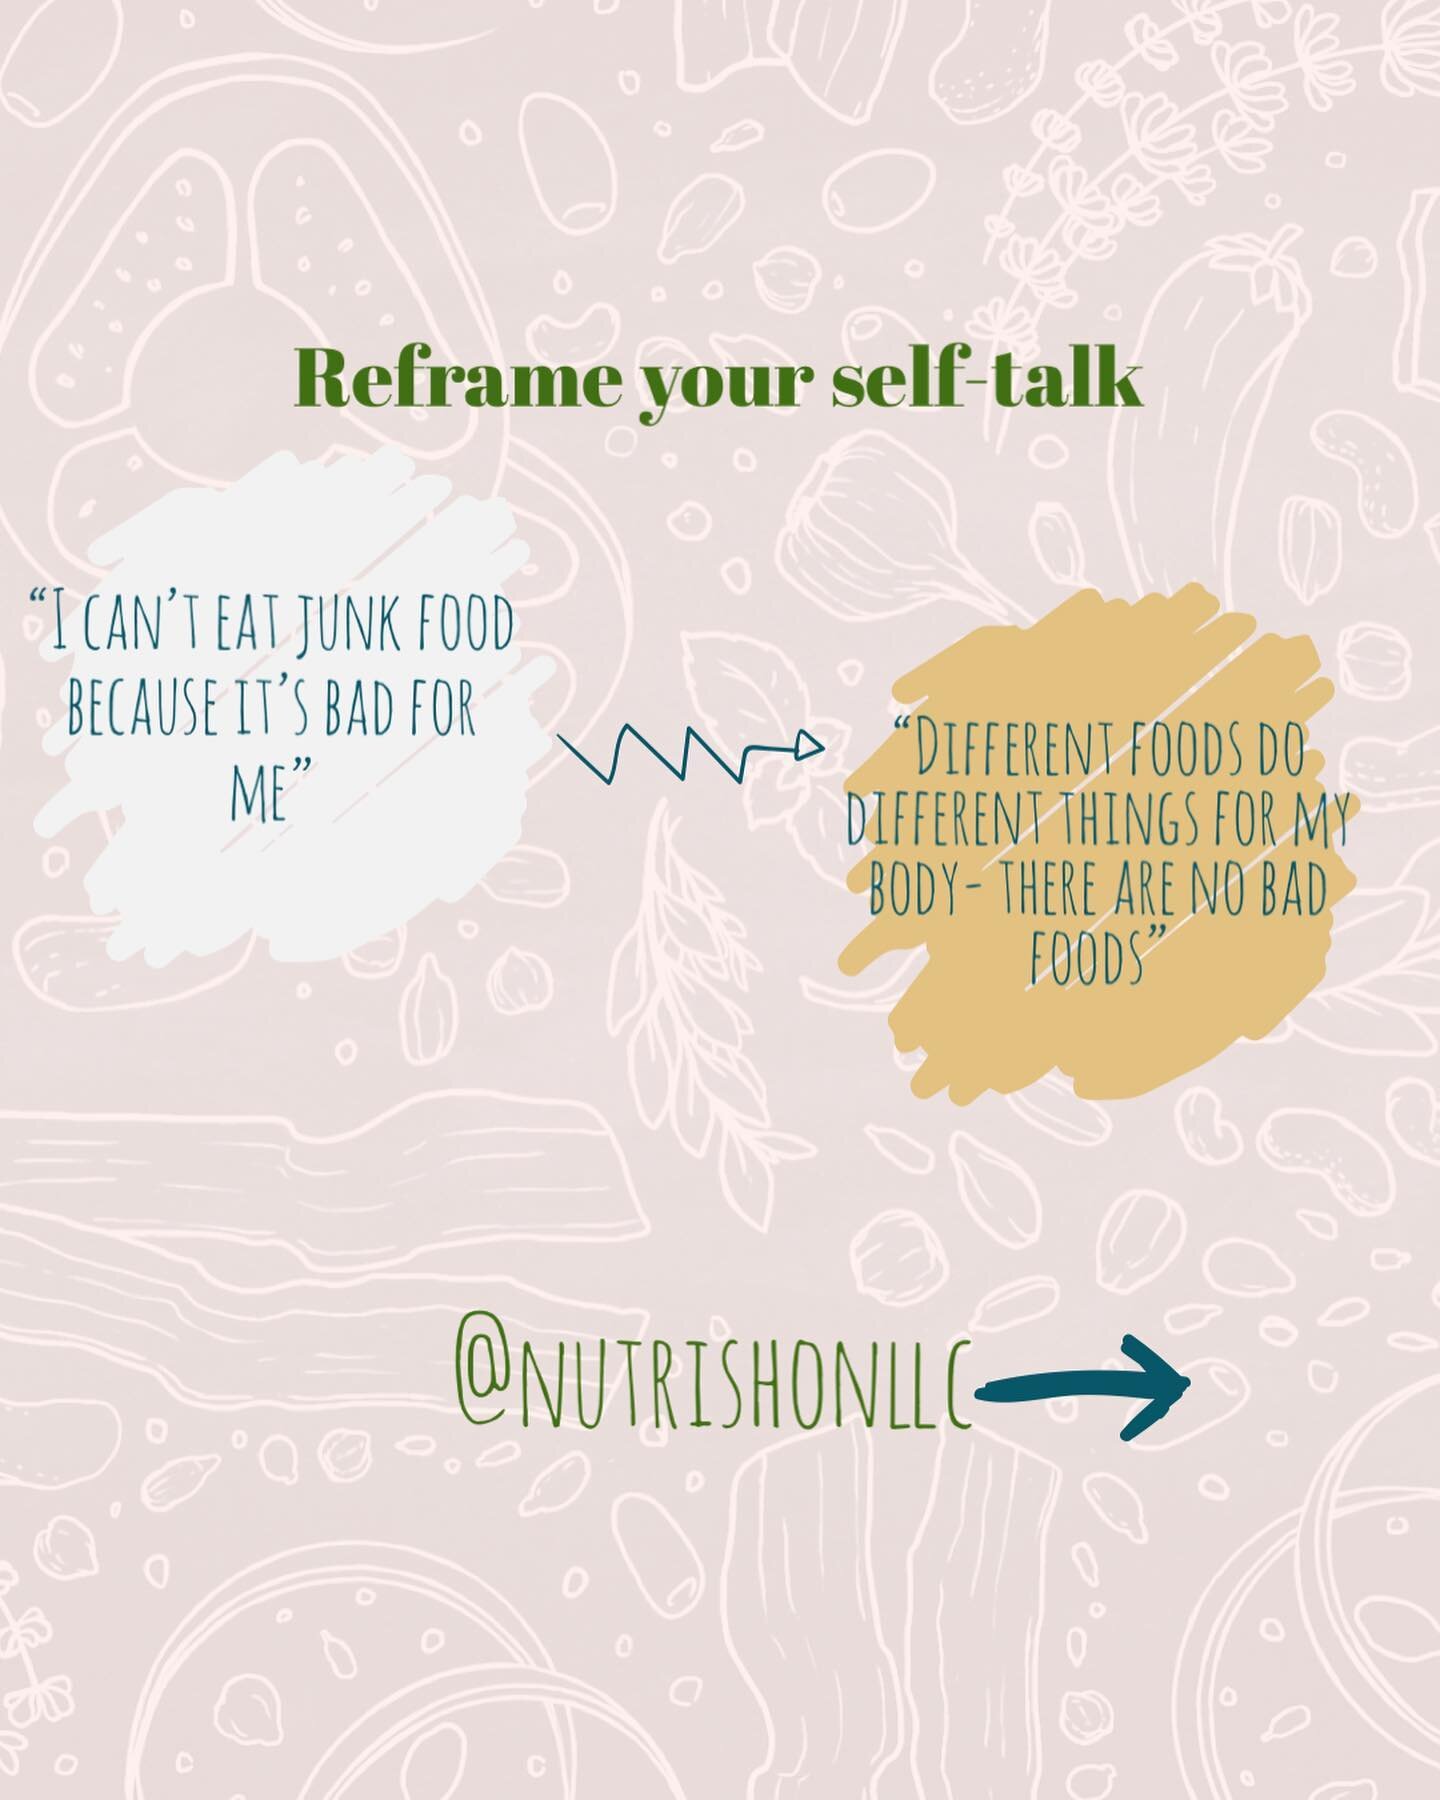 &ldquo;❤️&rdquo; this post for future reference!

Self-talk is something that we learn very early on which can influence everything from how we dress to how we eat. 

Reframing your self-talk with regards to food and nutrition can improve your relati